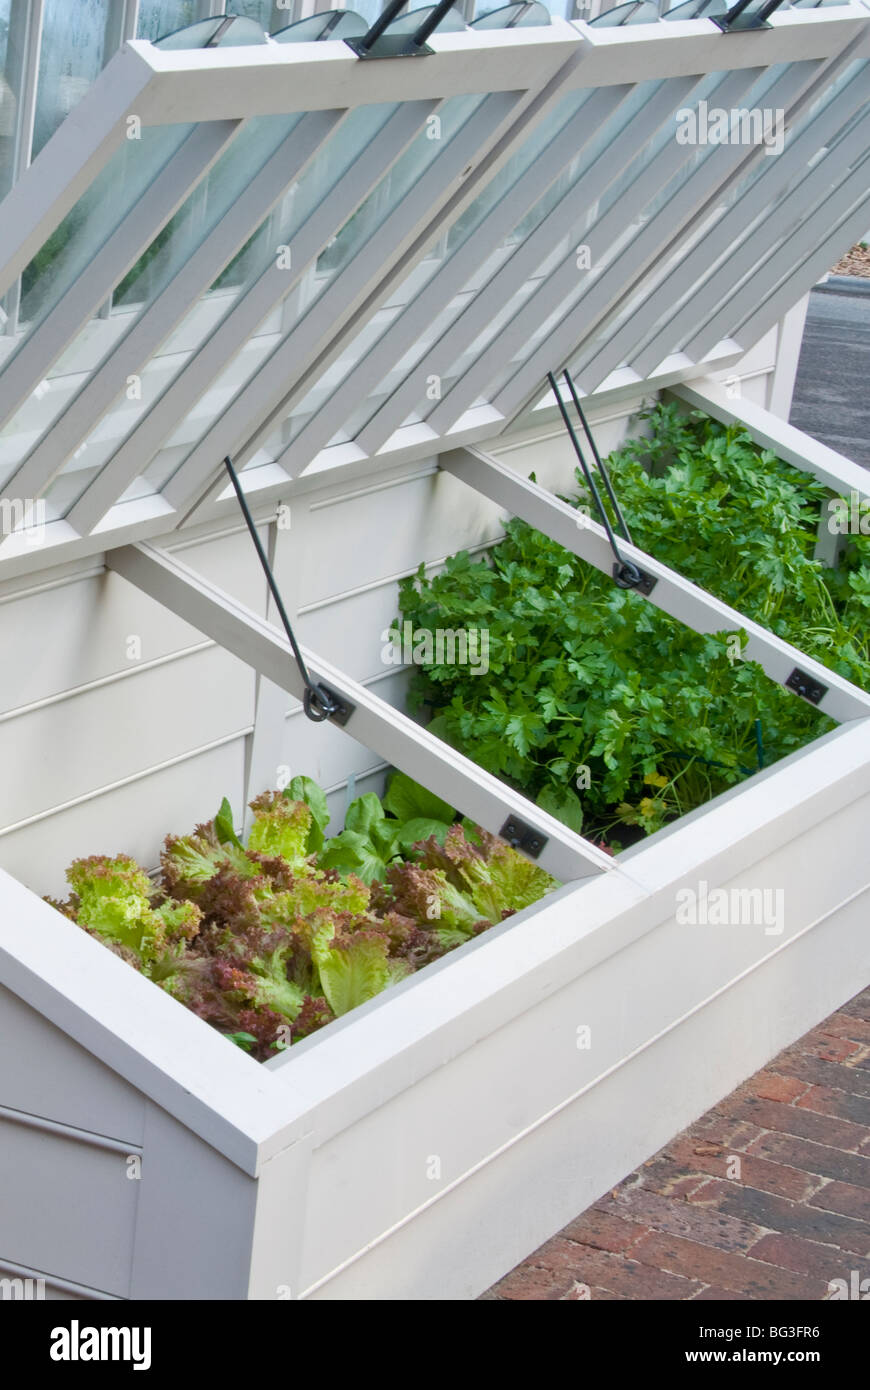 Cold frame of young garden vegetable plants being protected, with glass top open on wooden frame, next to brick patio Stock Photo